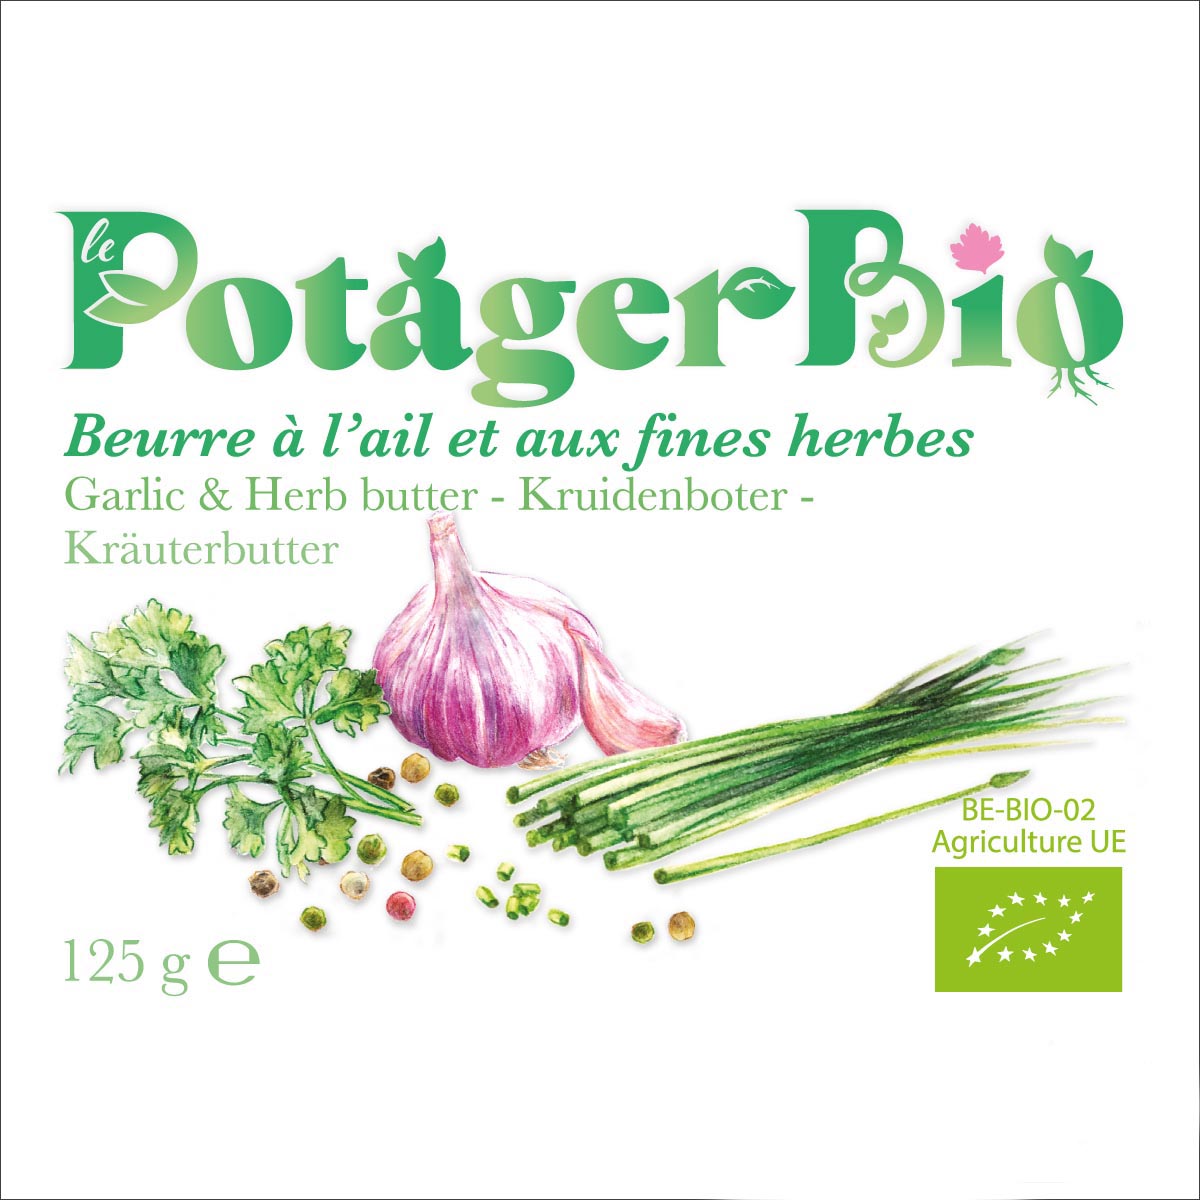 Le Potager Bio brand and illustration